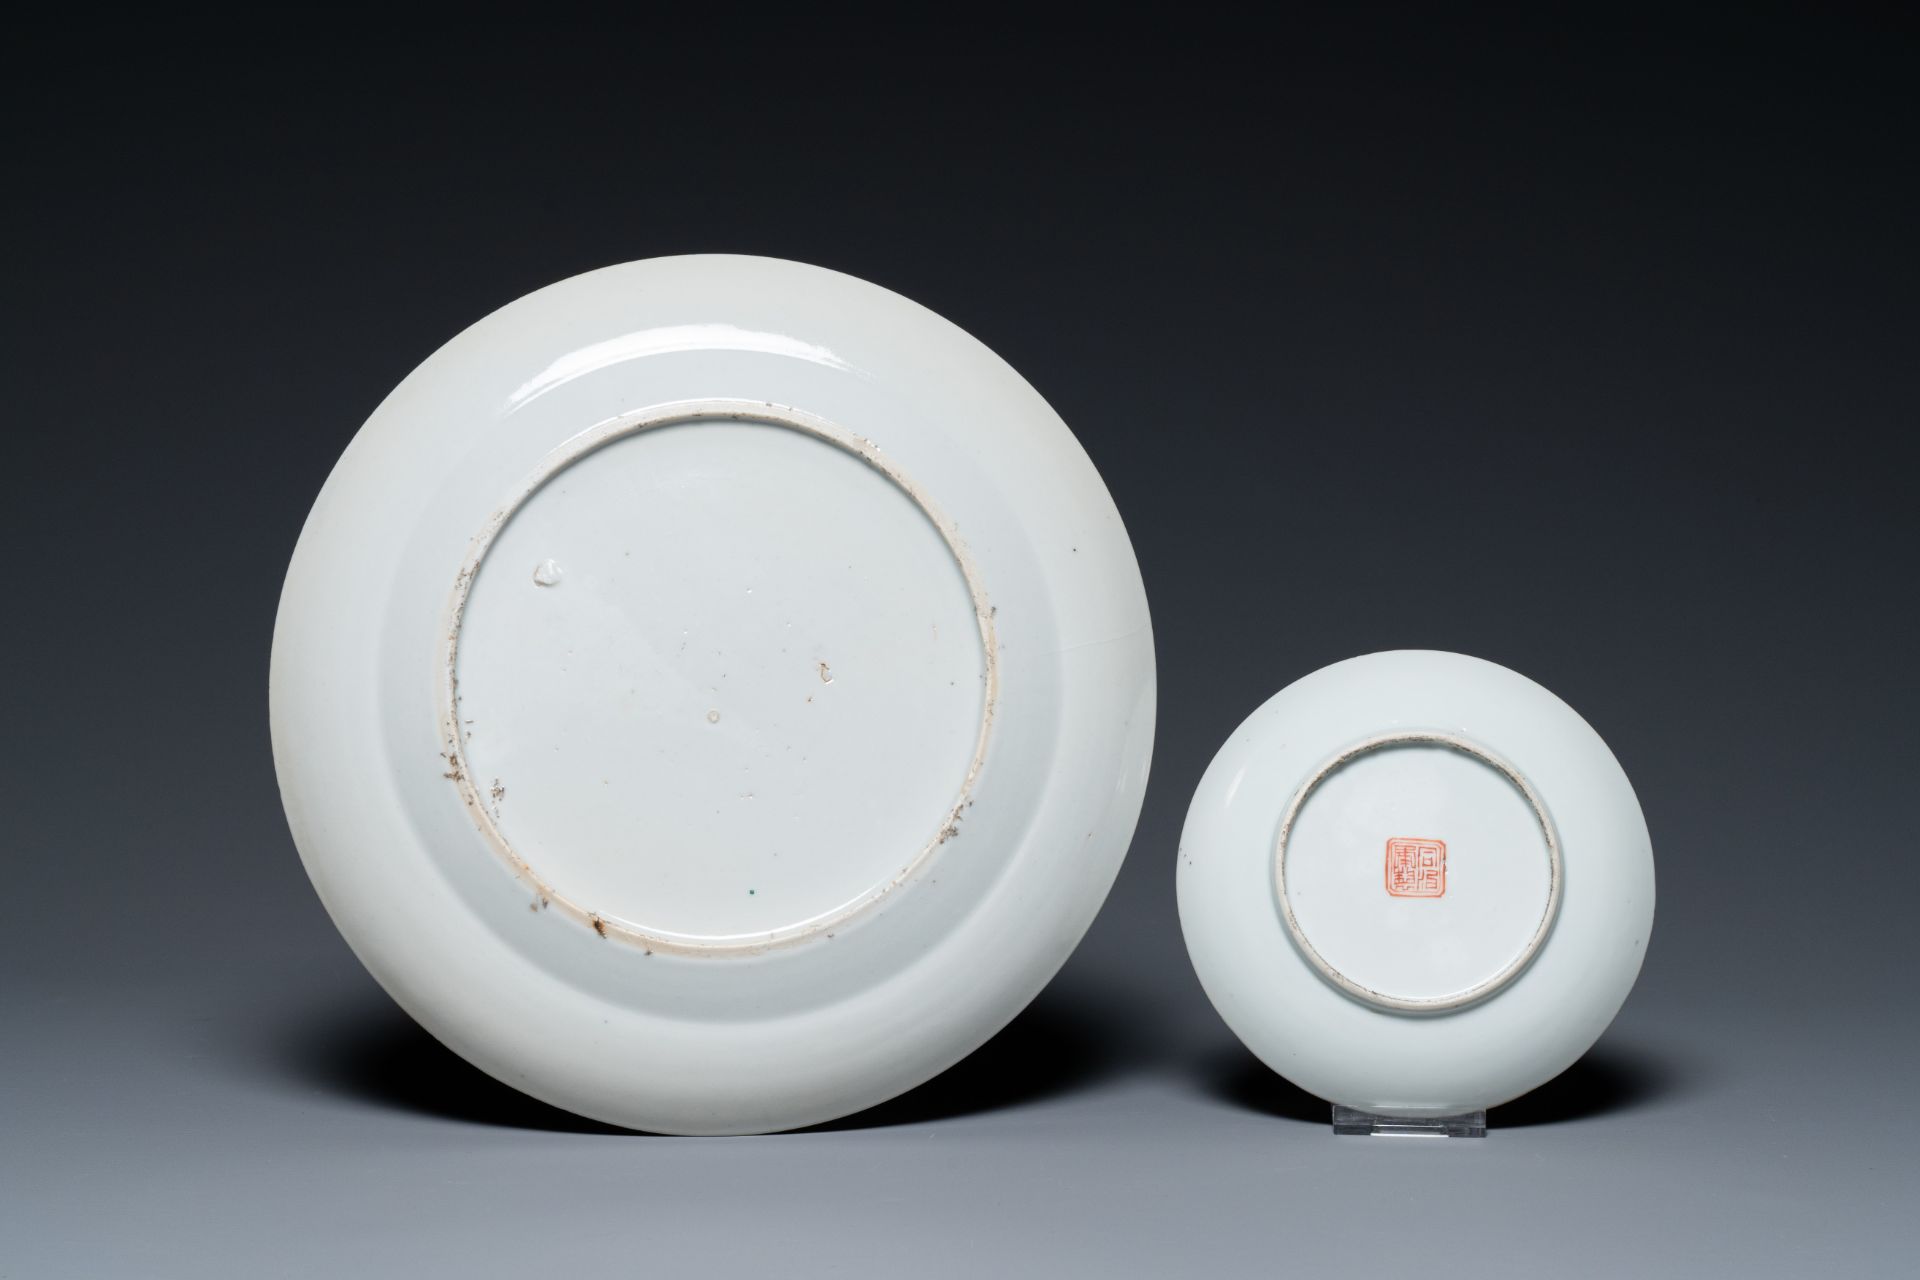 A varied collection of Chinese porcelain, 18/19th C. - Image 3 of 11